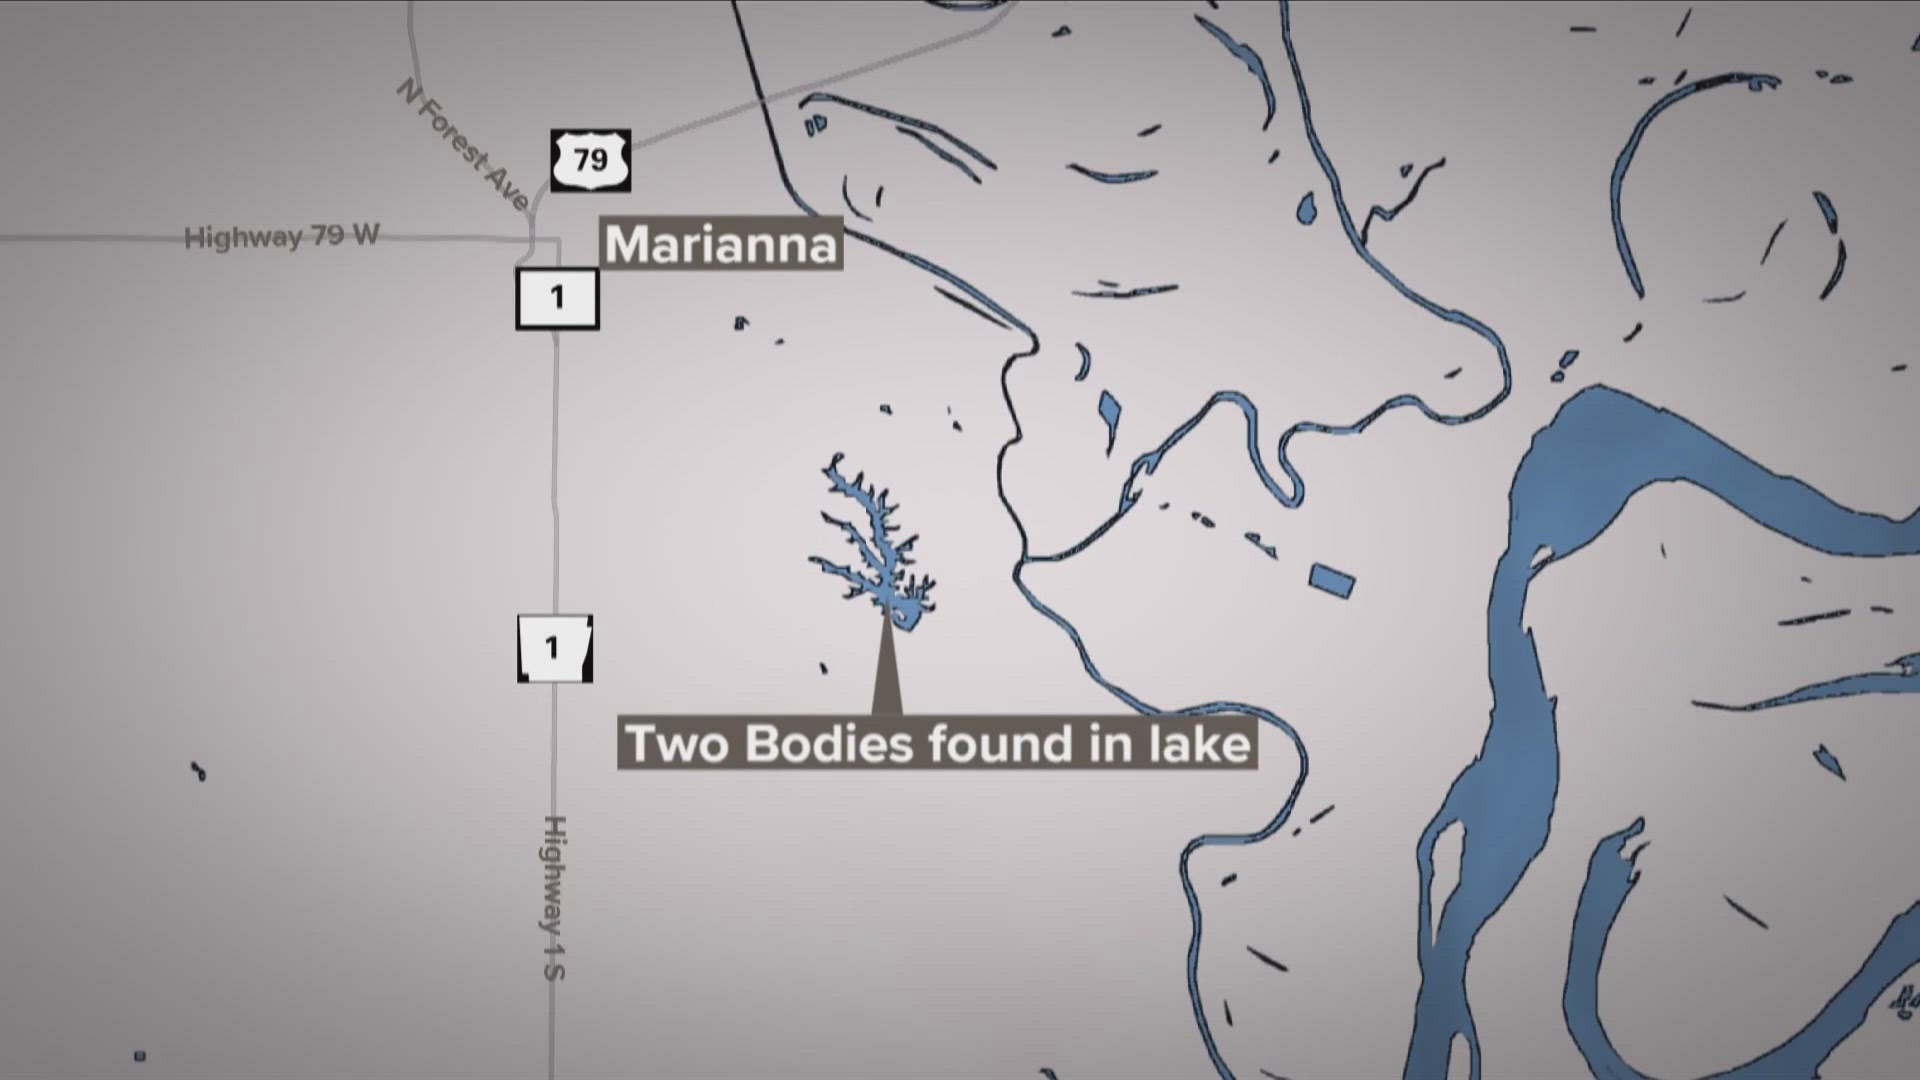 The Arkansas Game and Fish Commission is investigating after officials said two bodies were recovered from a lake near Marianna.